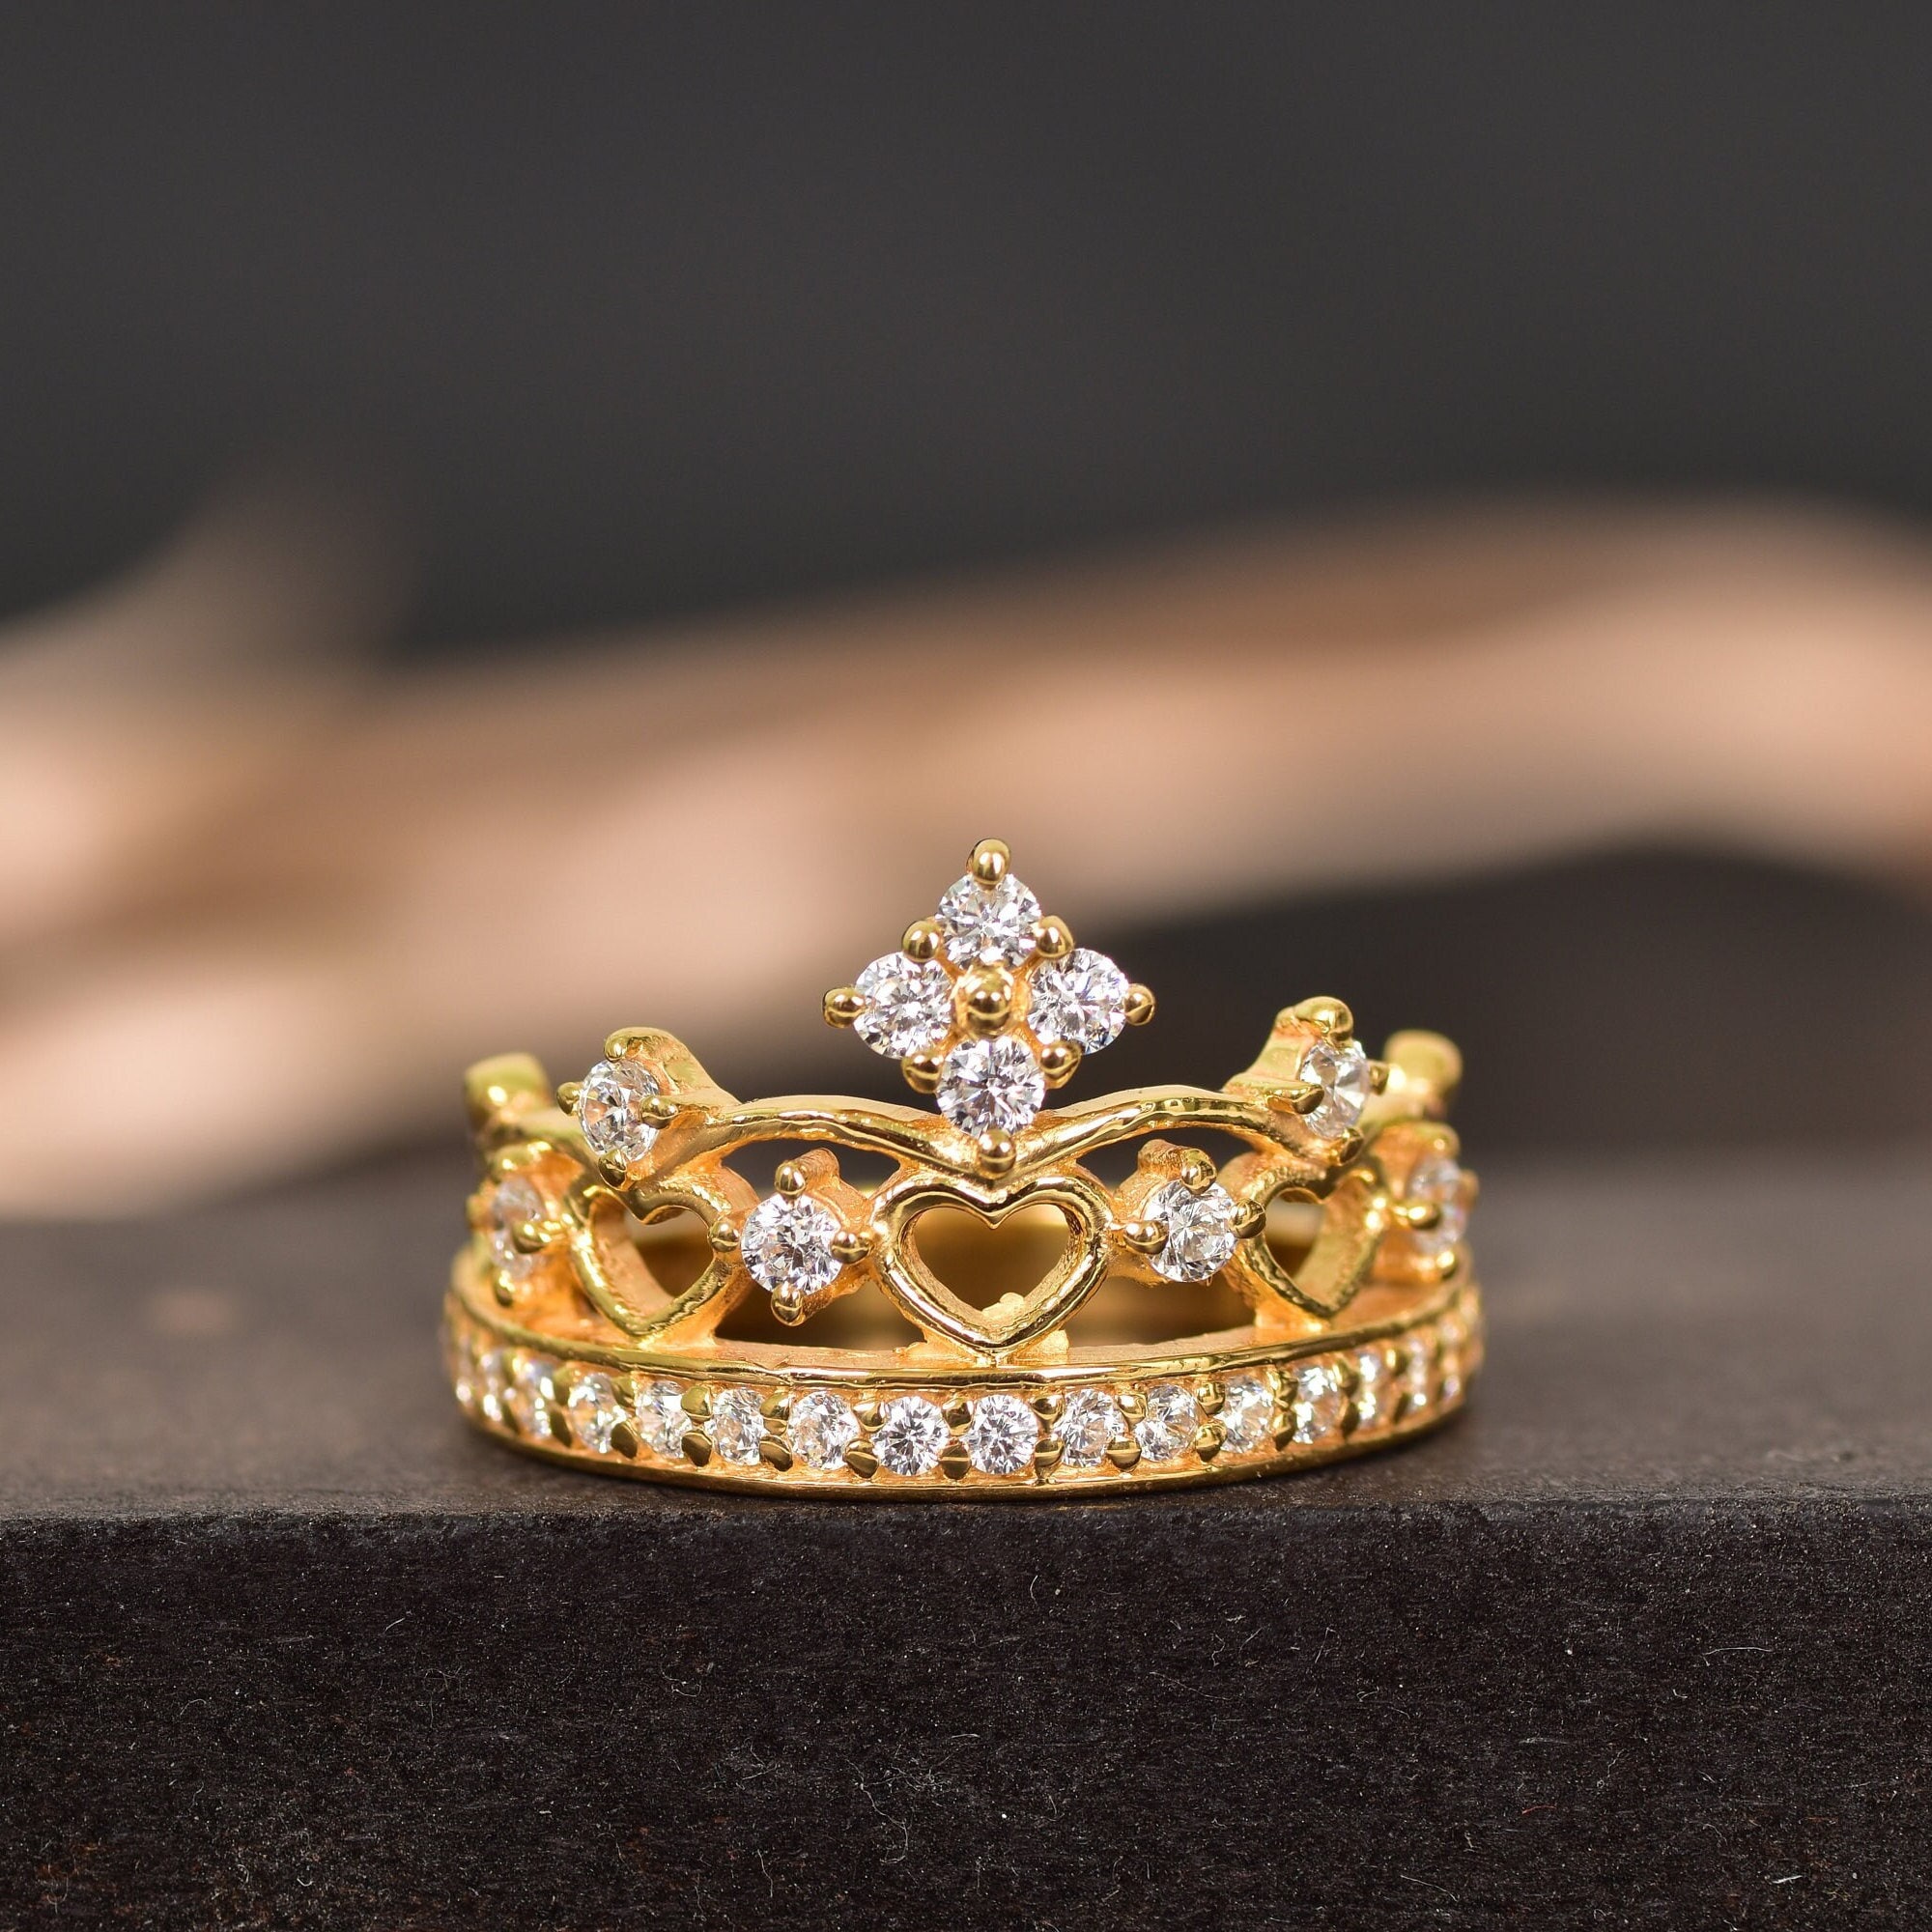 PC Chandra Jewellers Crown 14kt Yellow Gold ring Price in India - Buy PC  Chandra Jewellers Crown 14kt Yellow Gold ring online at Flipkart.com